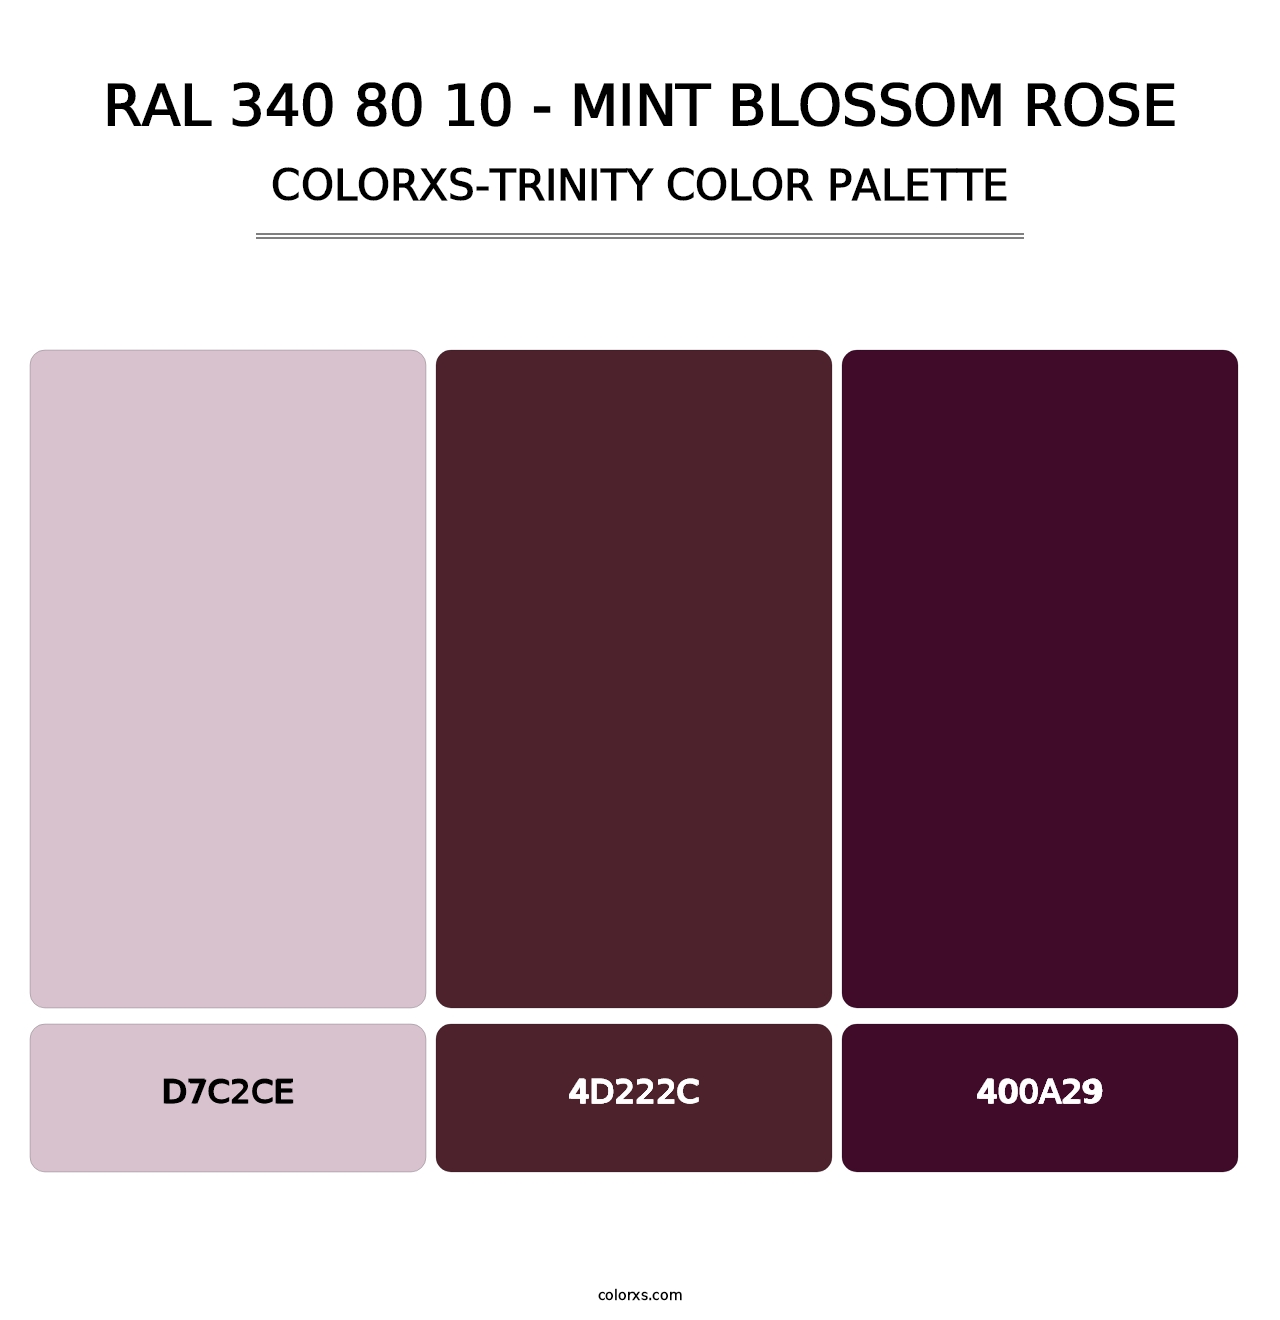 RAL 340 80 10 - Mint Blossom Rose - Colorxs Trinity Palette